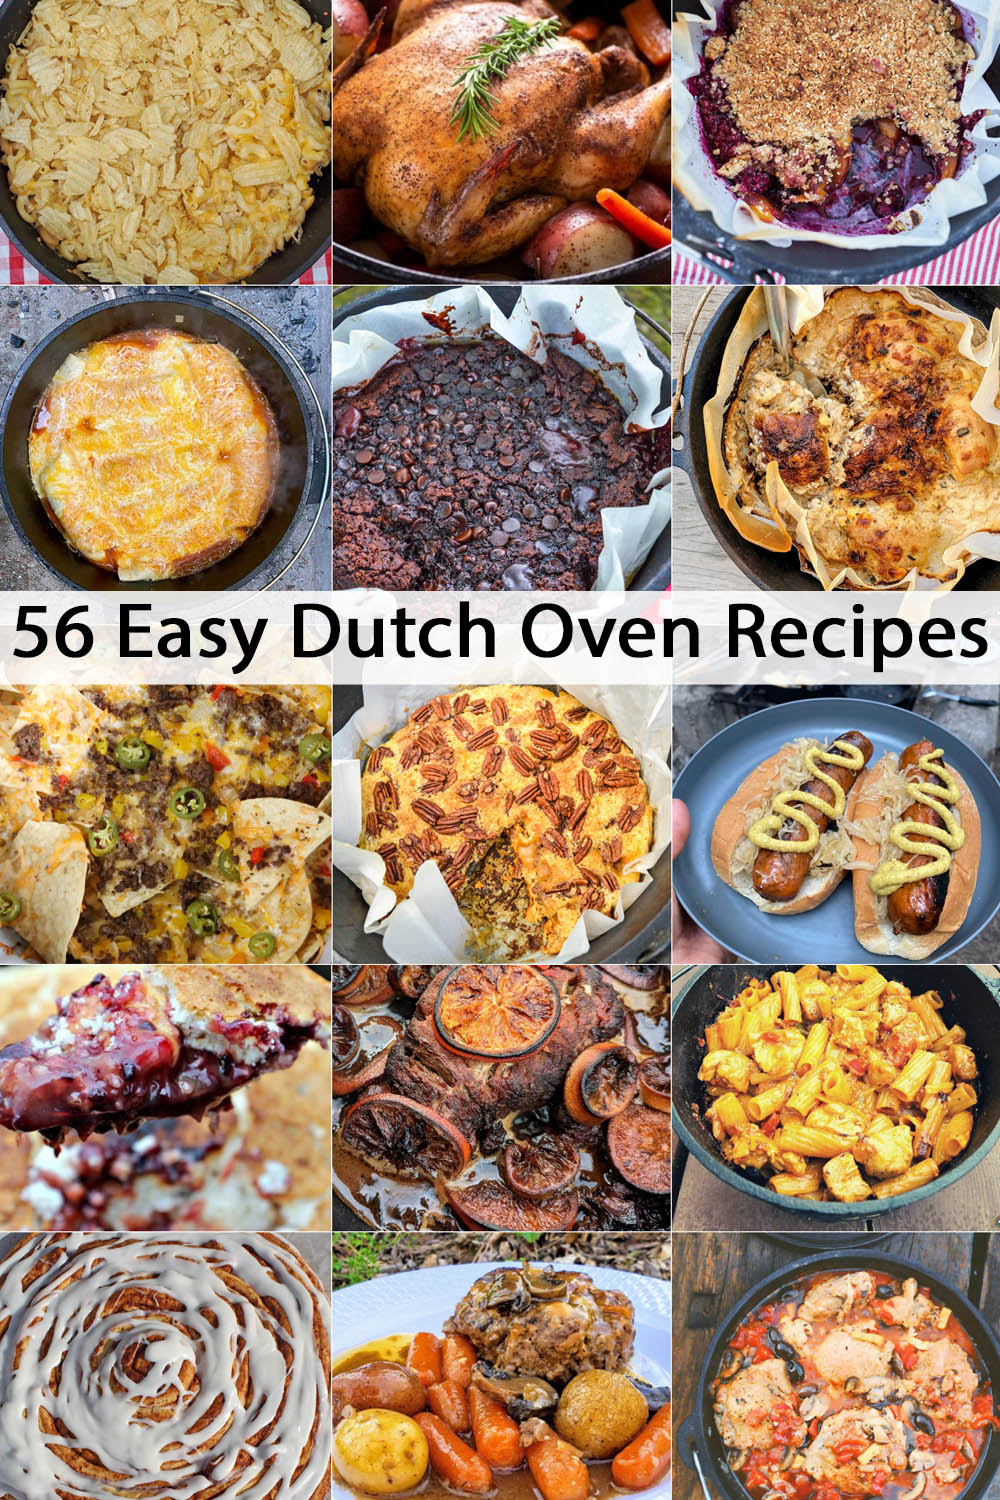 65 Easy Dutch Oven Camping Recipes | Let's Camp S'more™